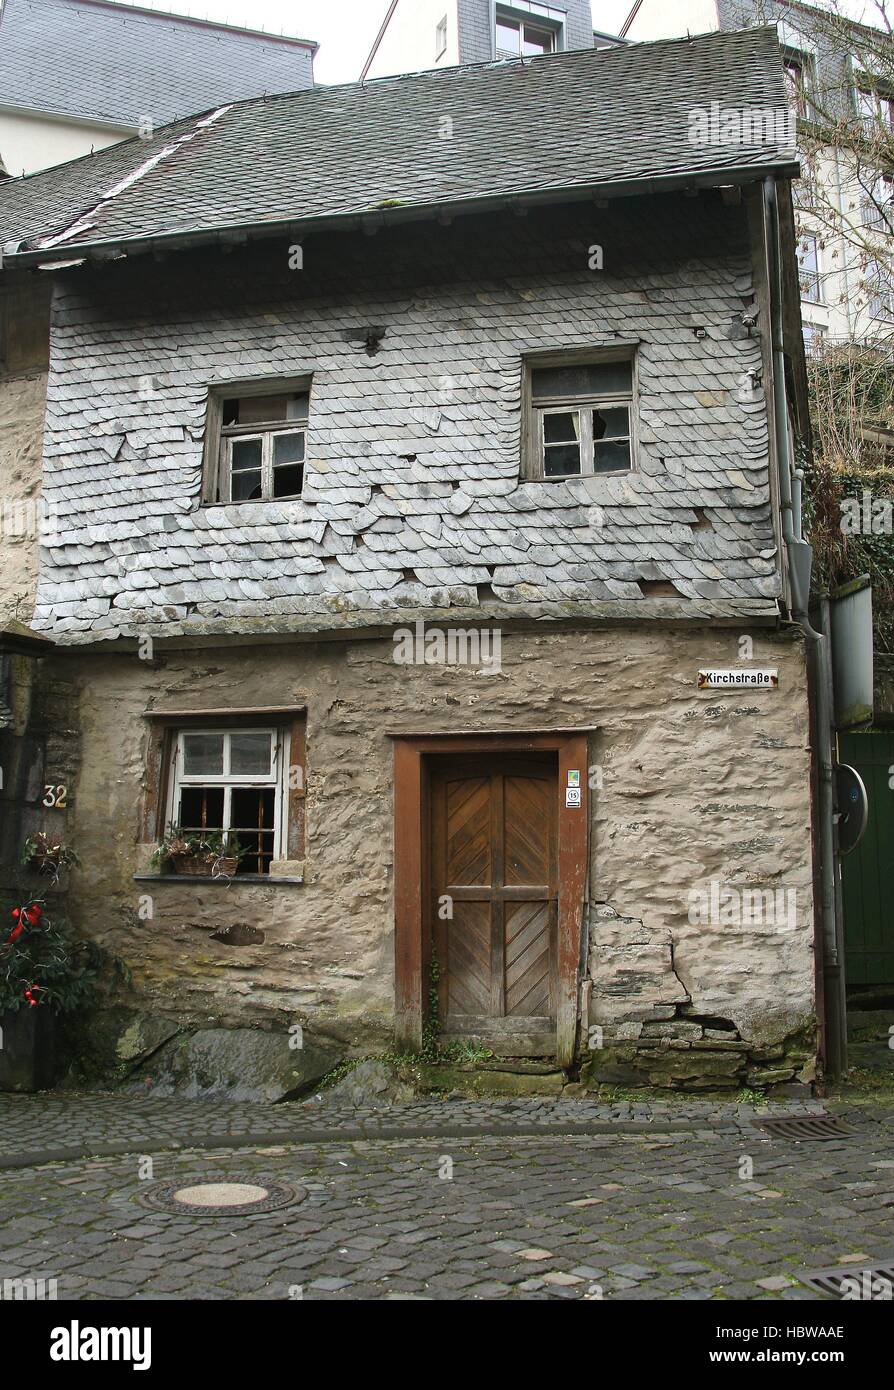 Derelict private house on a cobbled street in the market town of Monschau North Rhine-Westphalia Germany EU 2016 Stock Photo